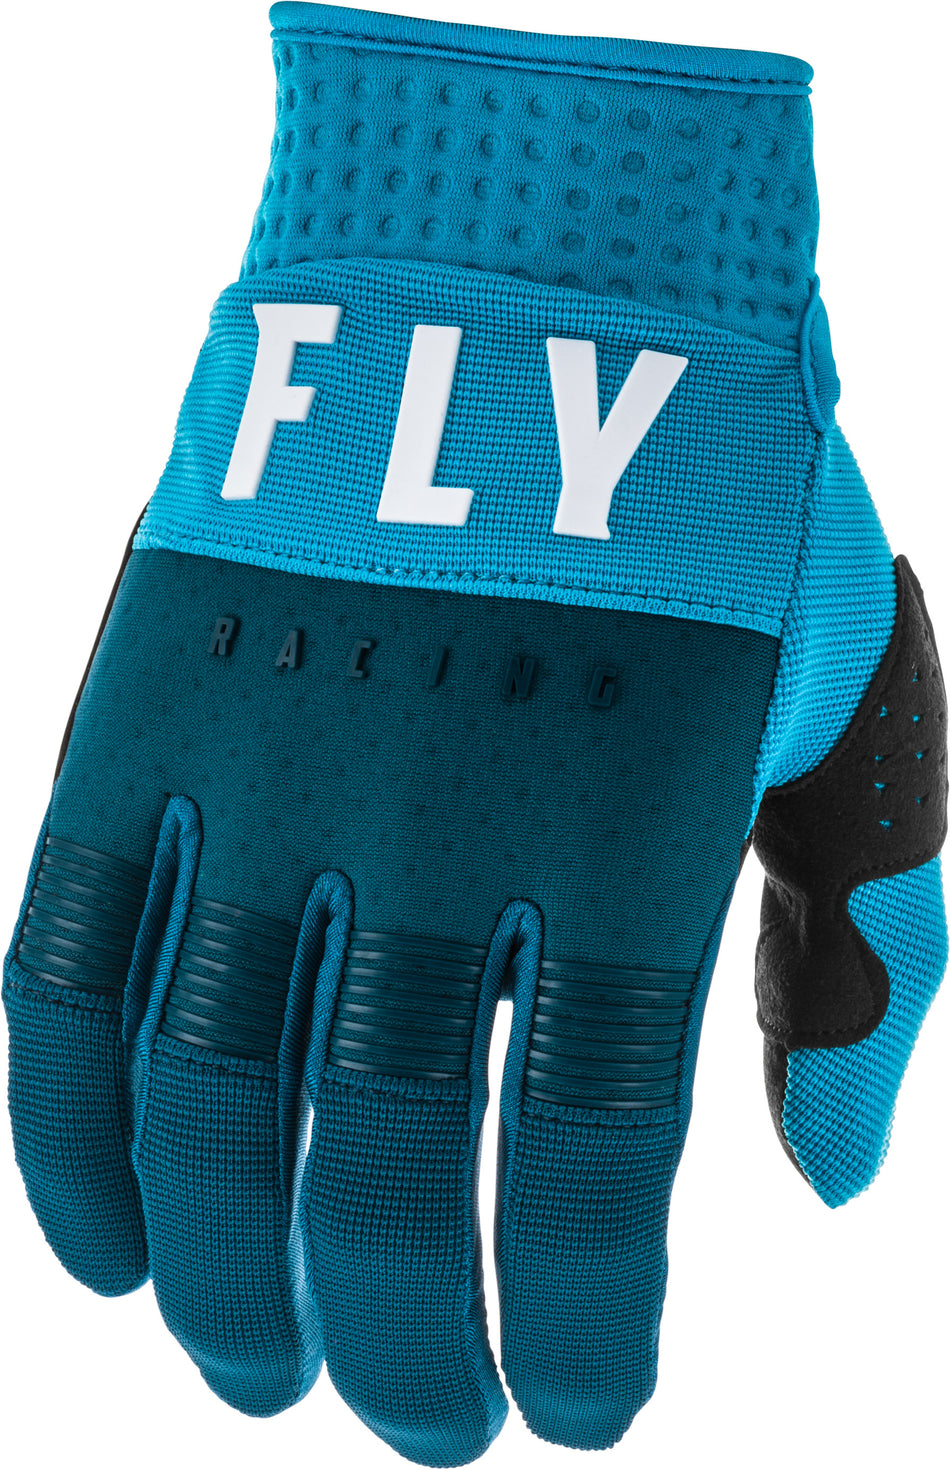 FLY RACING F-16 Gloves Navy/Blue/White Sz 08 373-91108